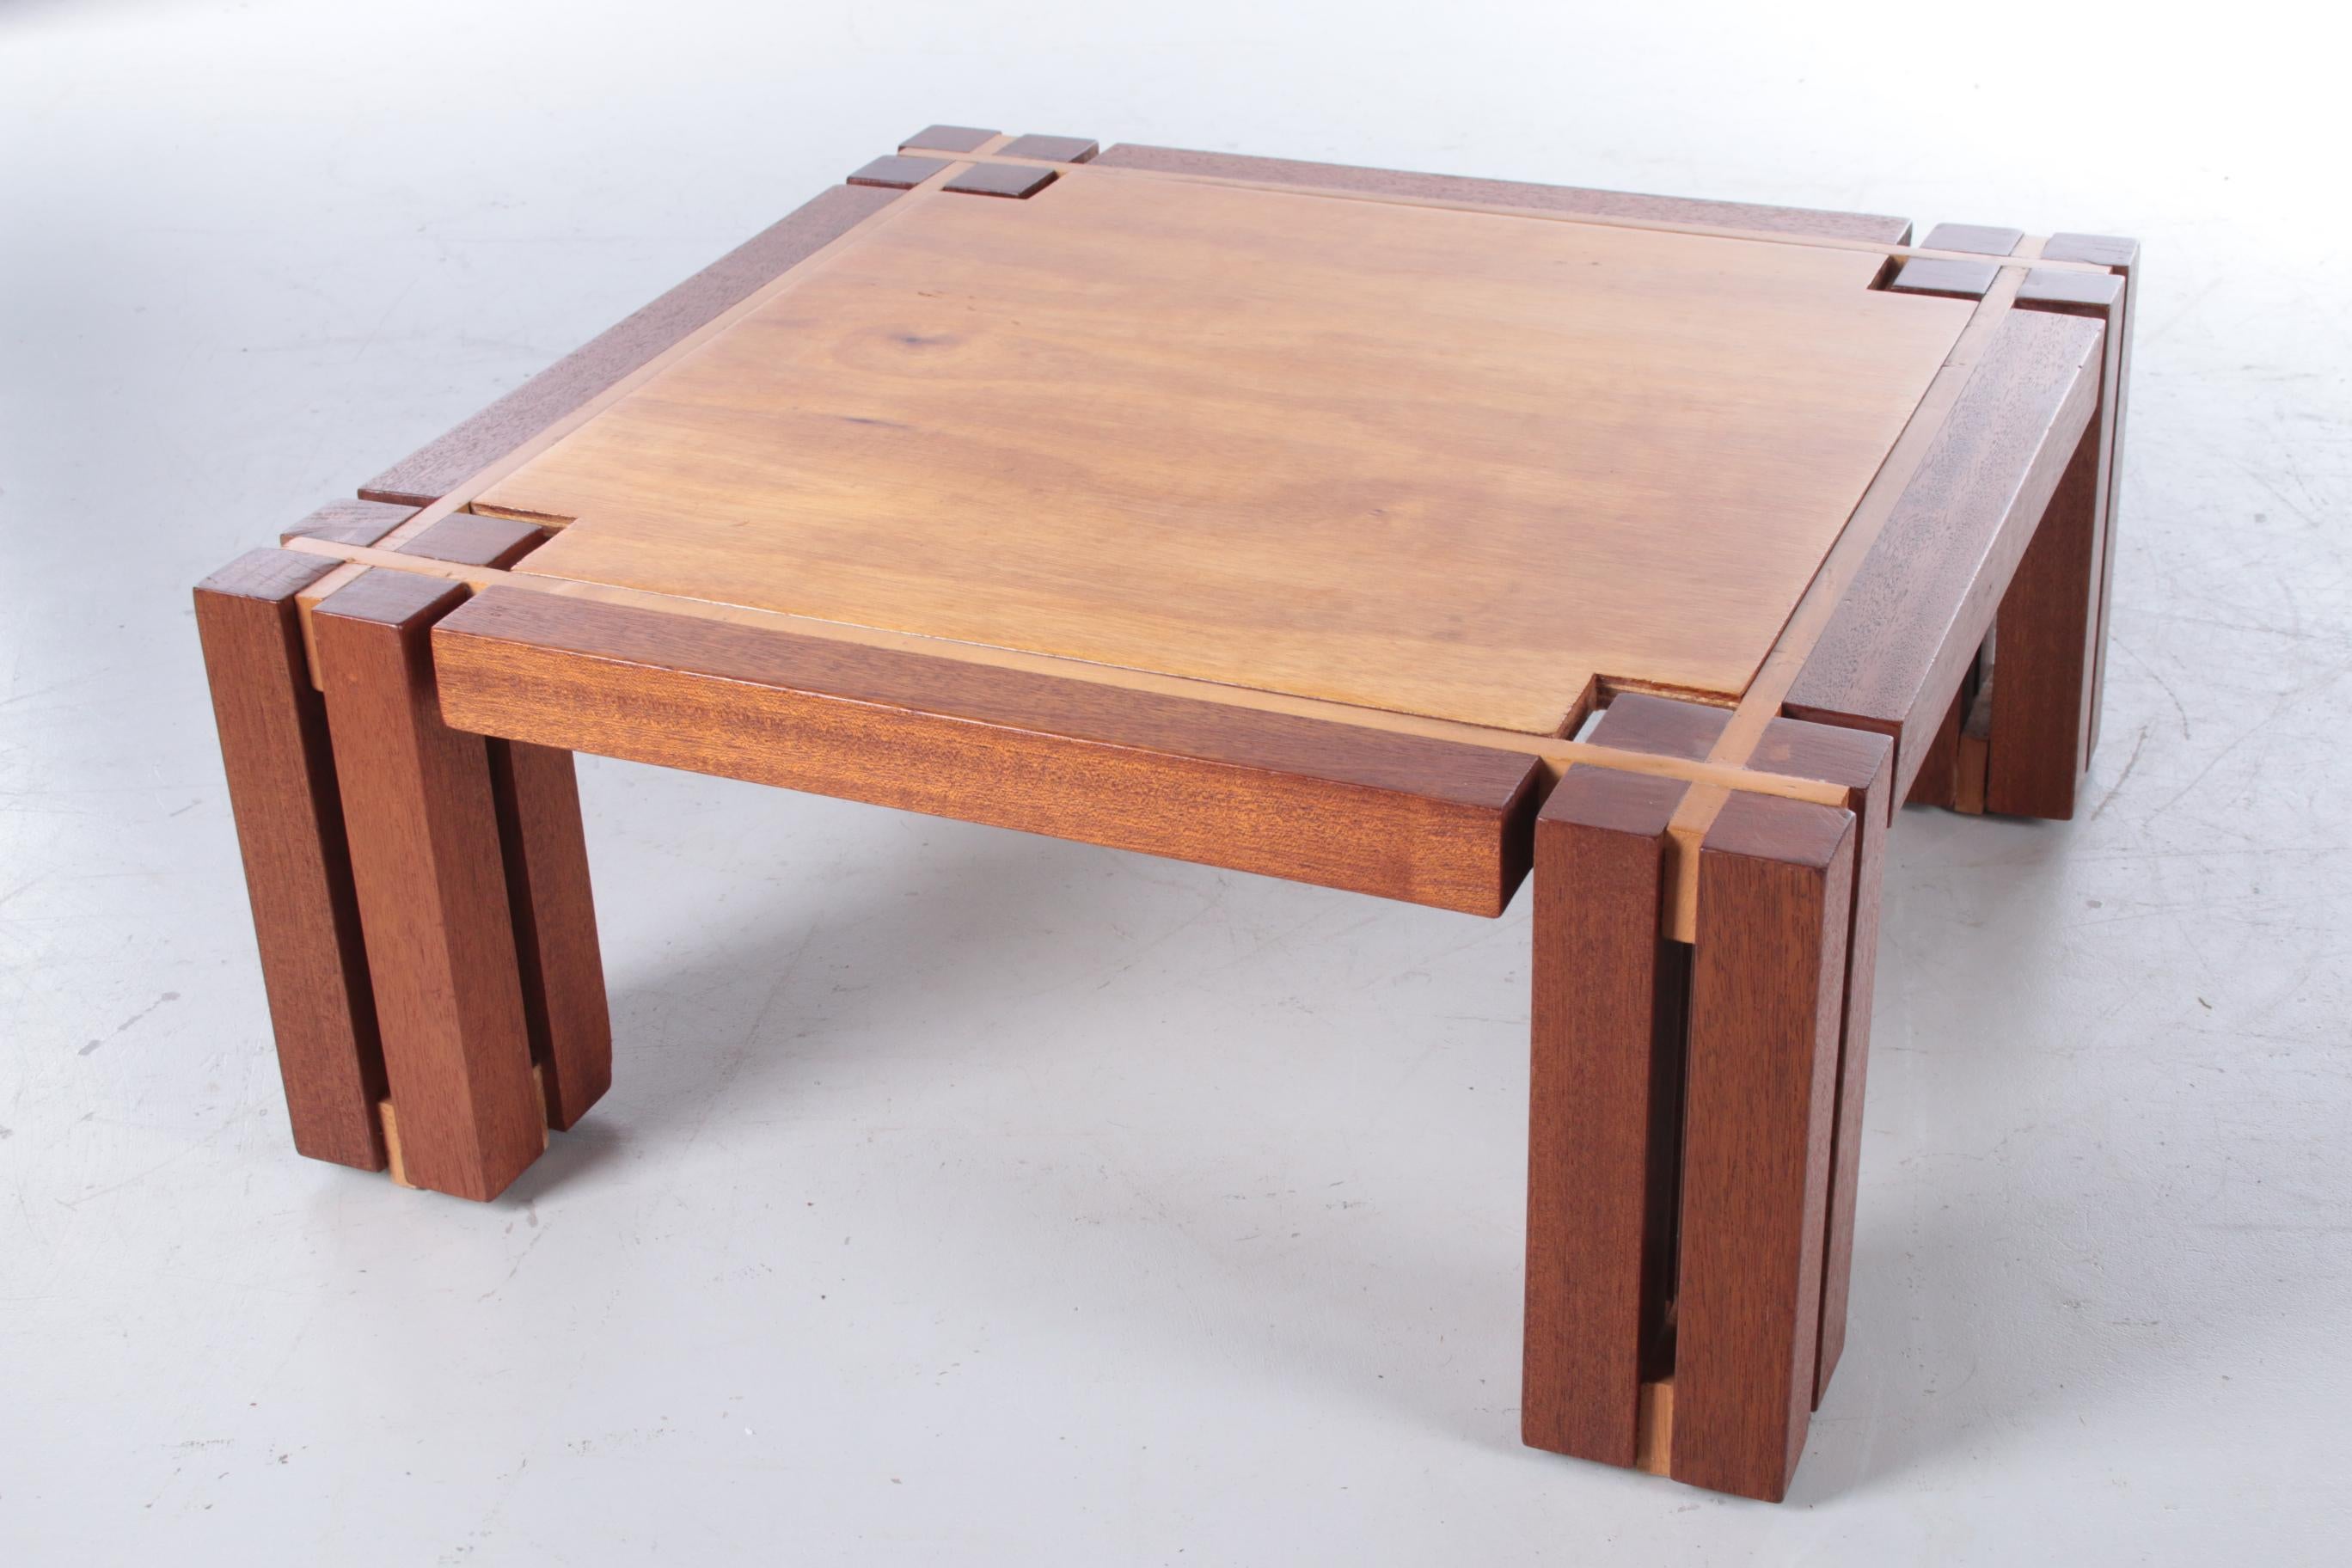 Brutalist teak wood coffee table, 1970s

This is a solid wood coffee table beautiful with the two colors of wood.

It resembles the brutalist style beautiful openwork legs.

The leaf is loose in it, so it can be cleaned very well.

Made of